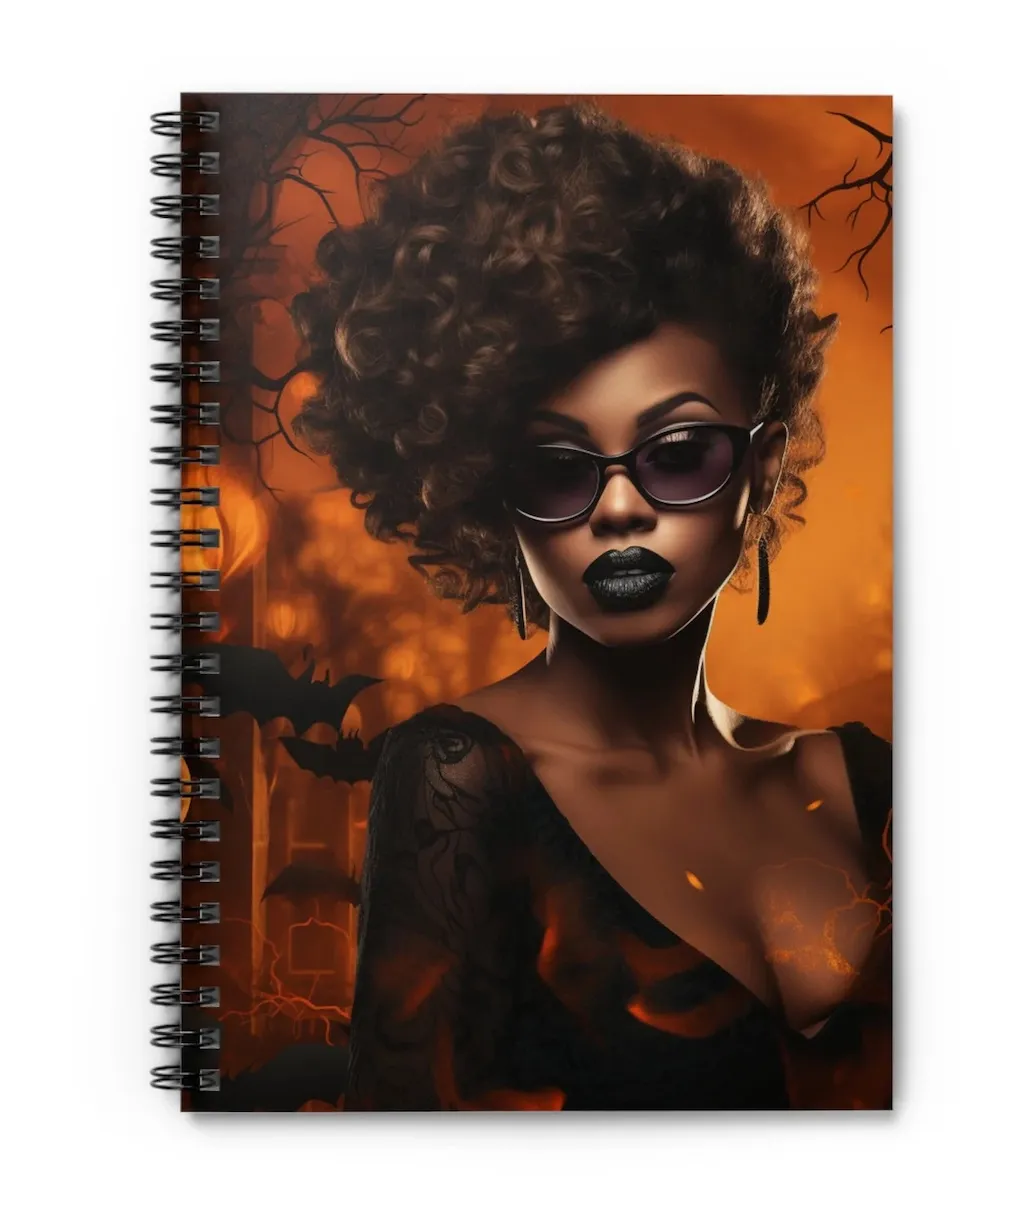 Spiral notebook with bats, twisted branches on an orange background and a Black woman wearing sunglasses